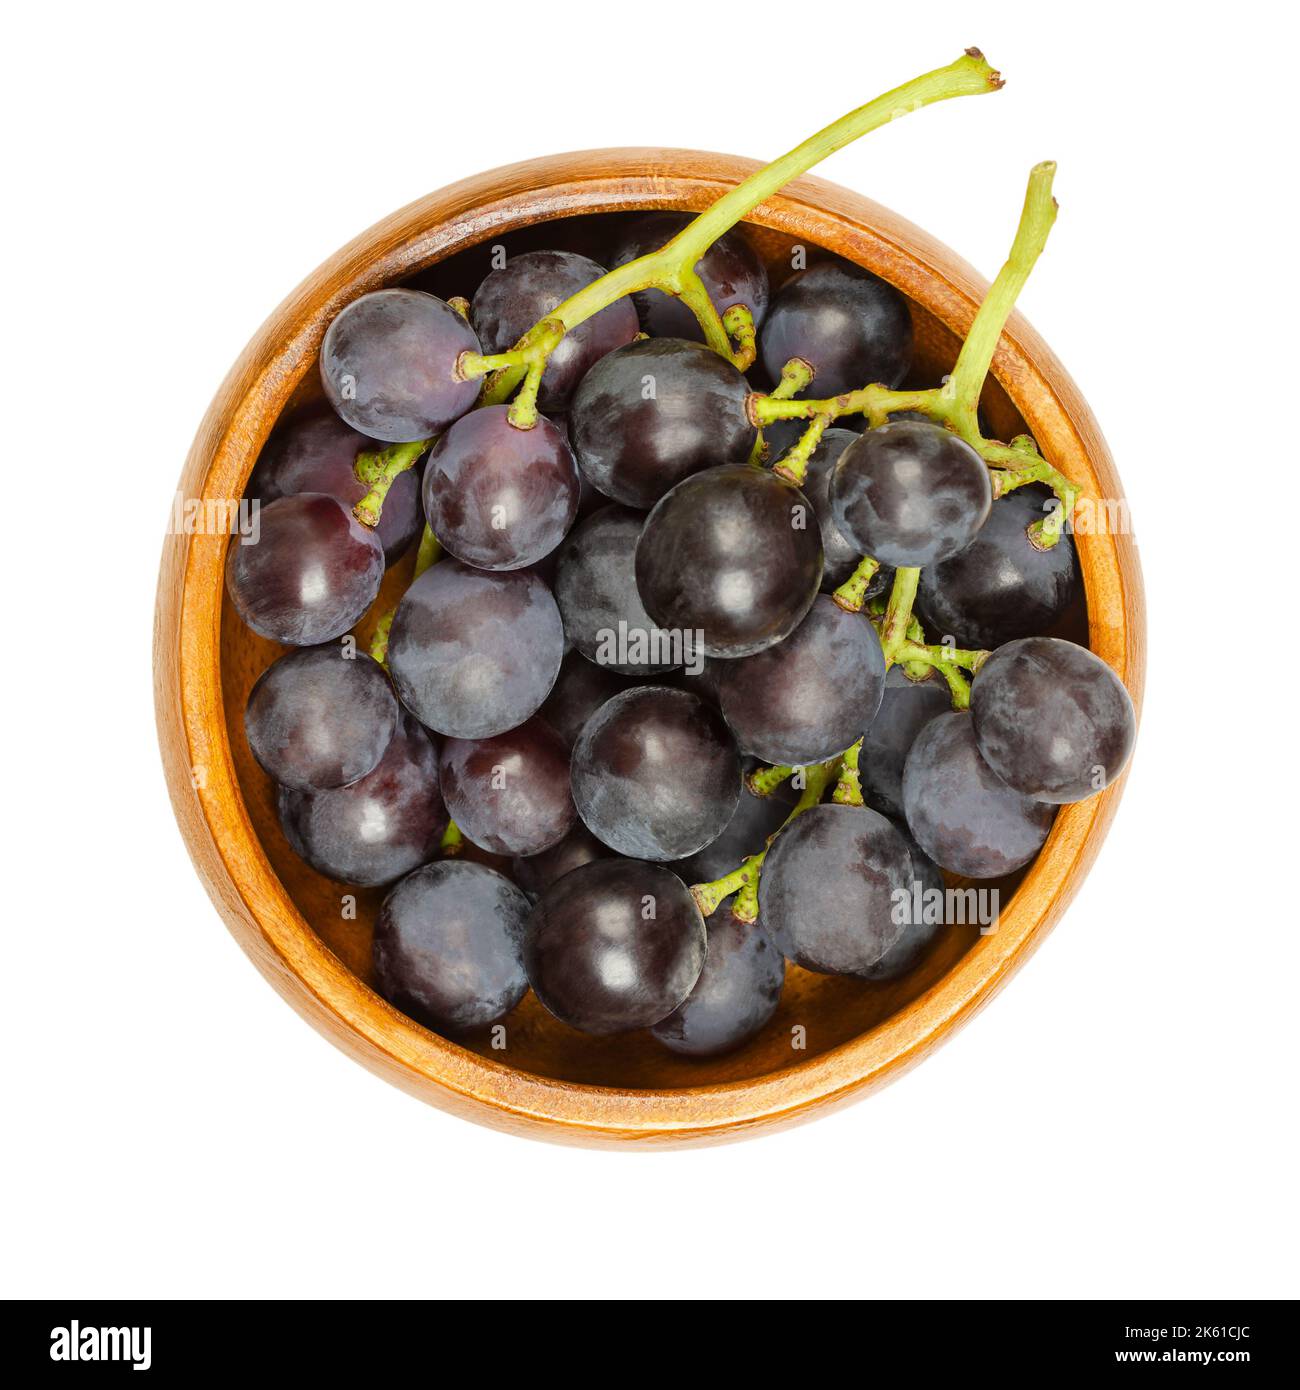 Common grape vines, in a wooden bowl. Freshly picked vines of ripe wild grapes, Vitis vinifera, with small dark purple grapes. Stock Photo